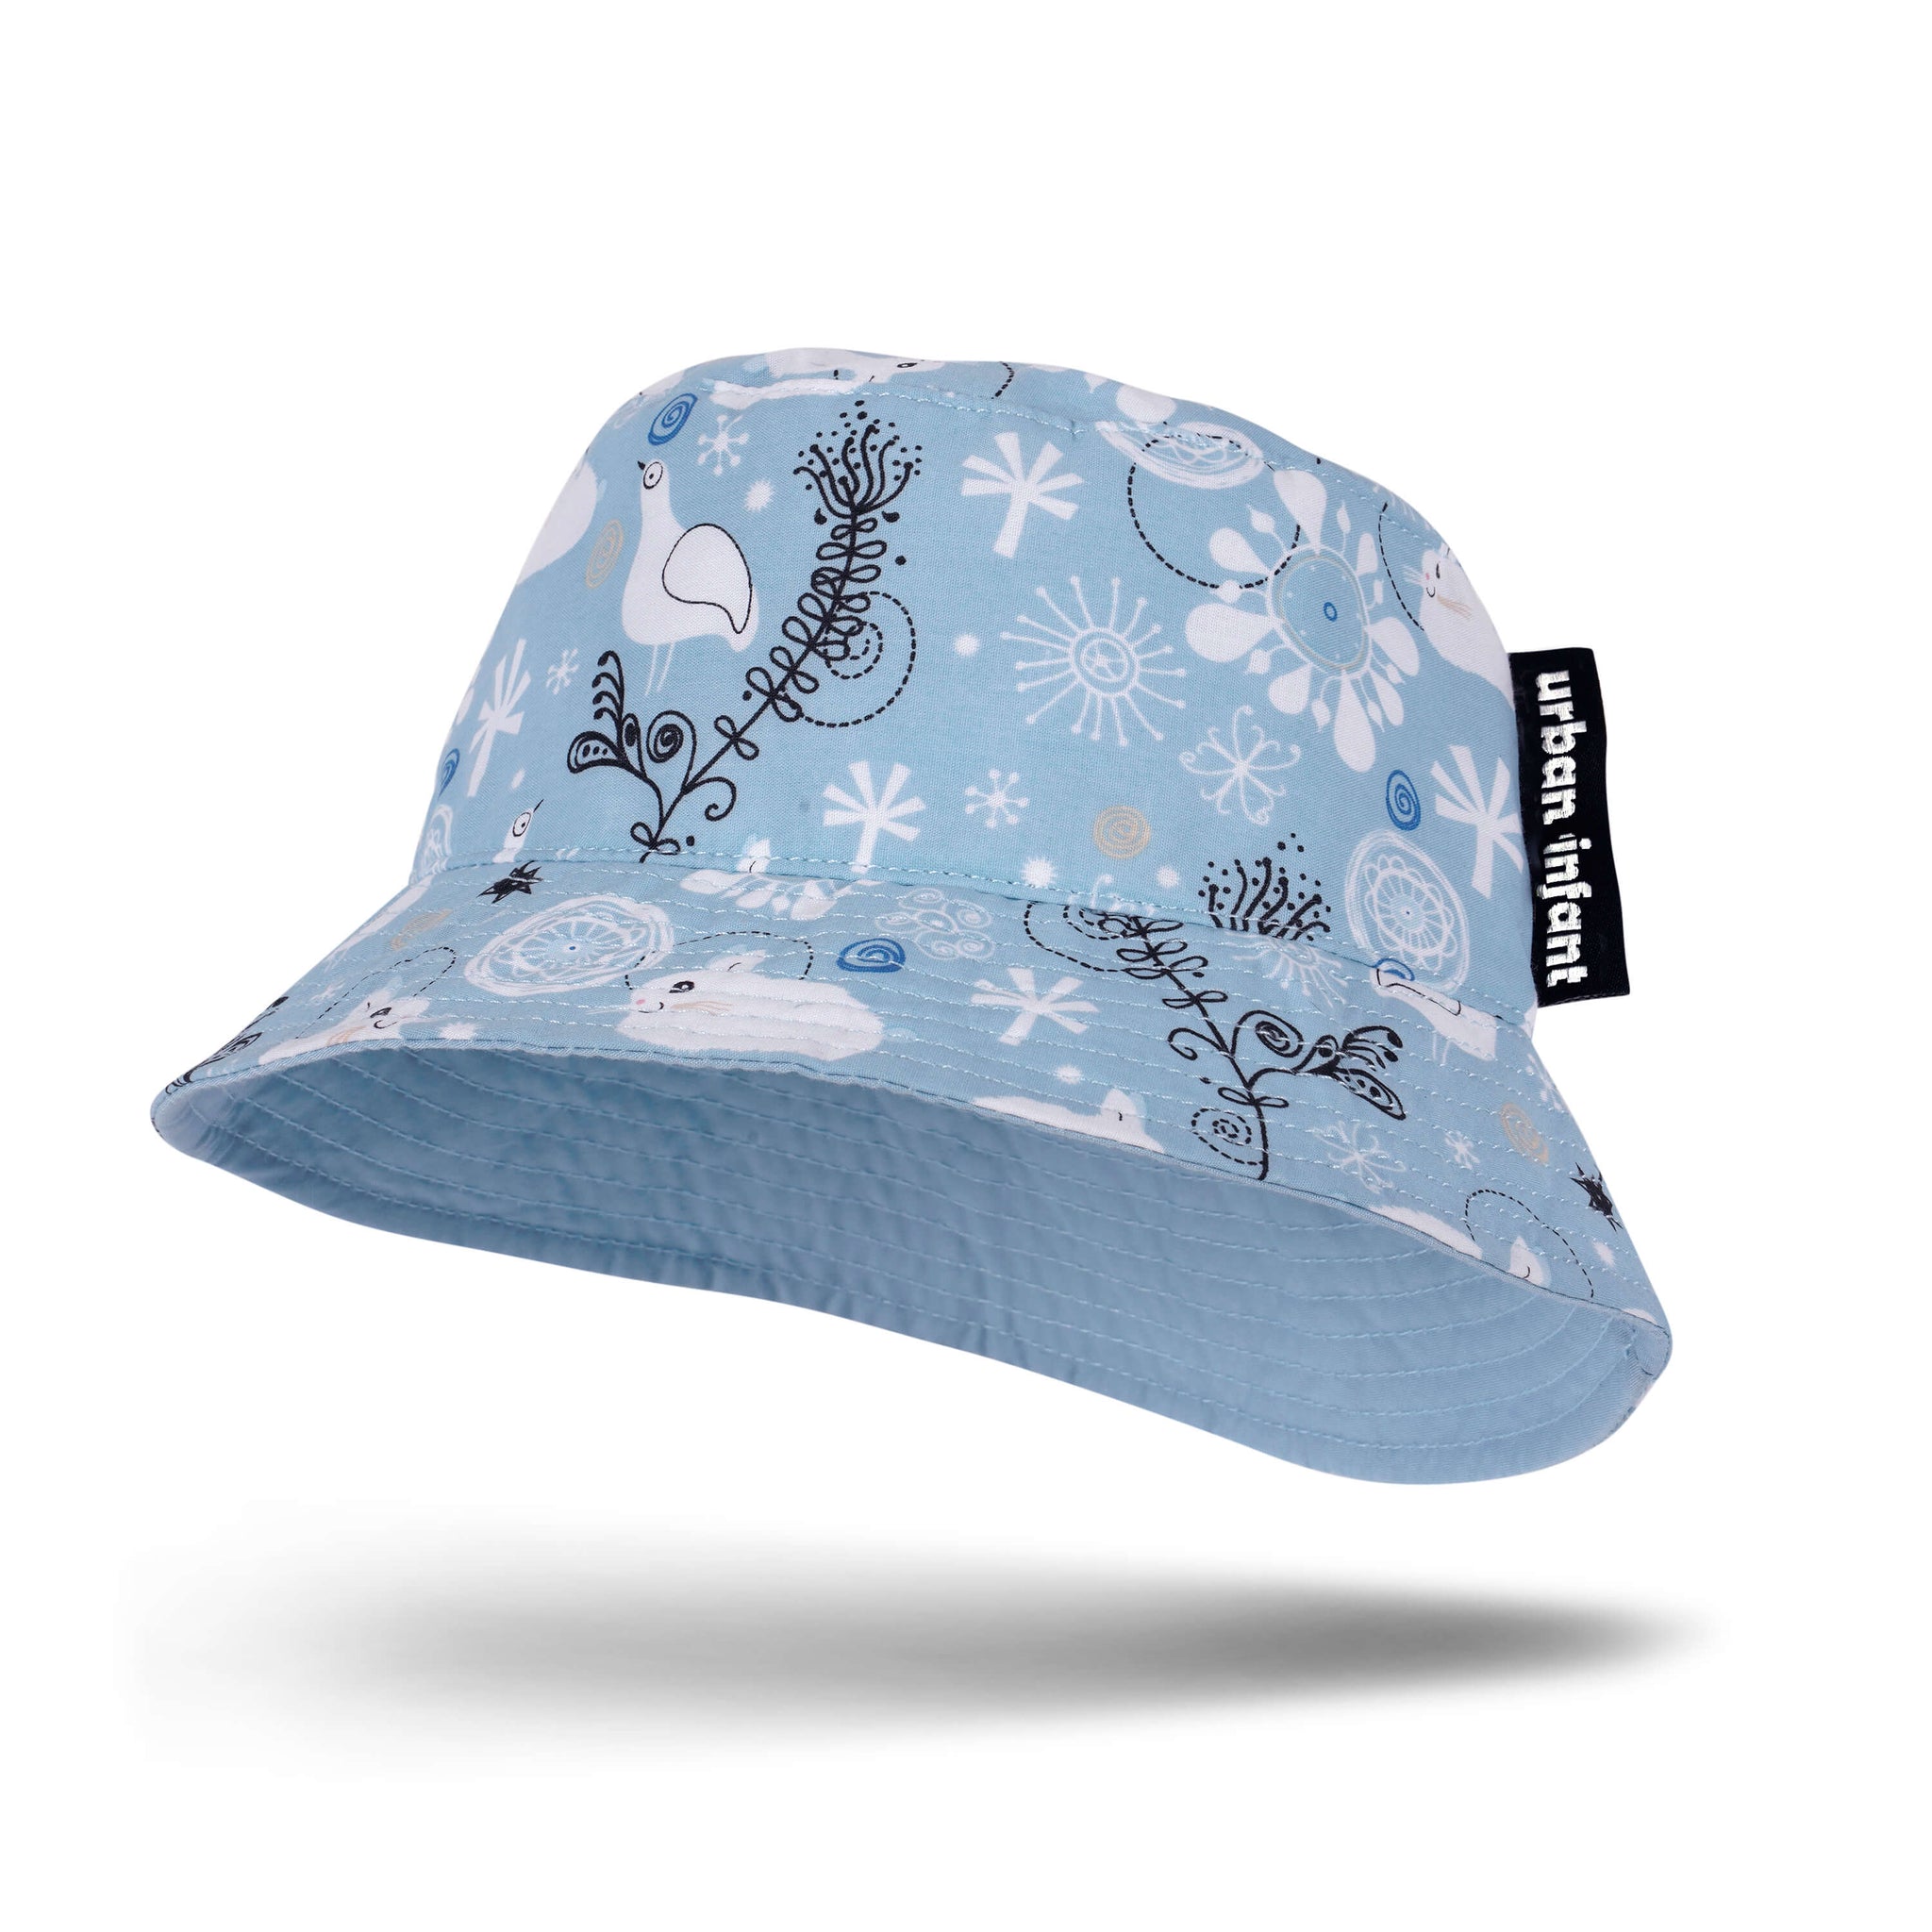 Reversible Bucket Hat for Toddlers